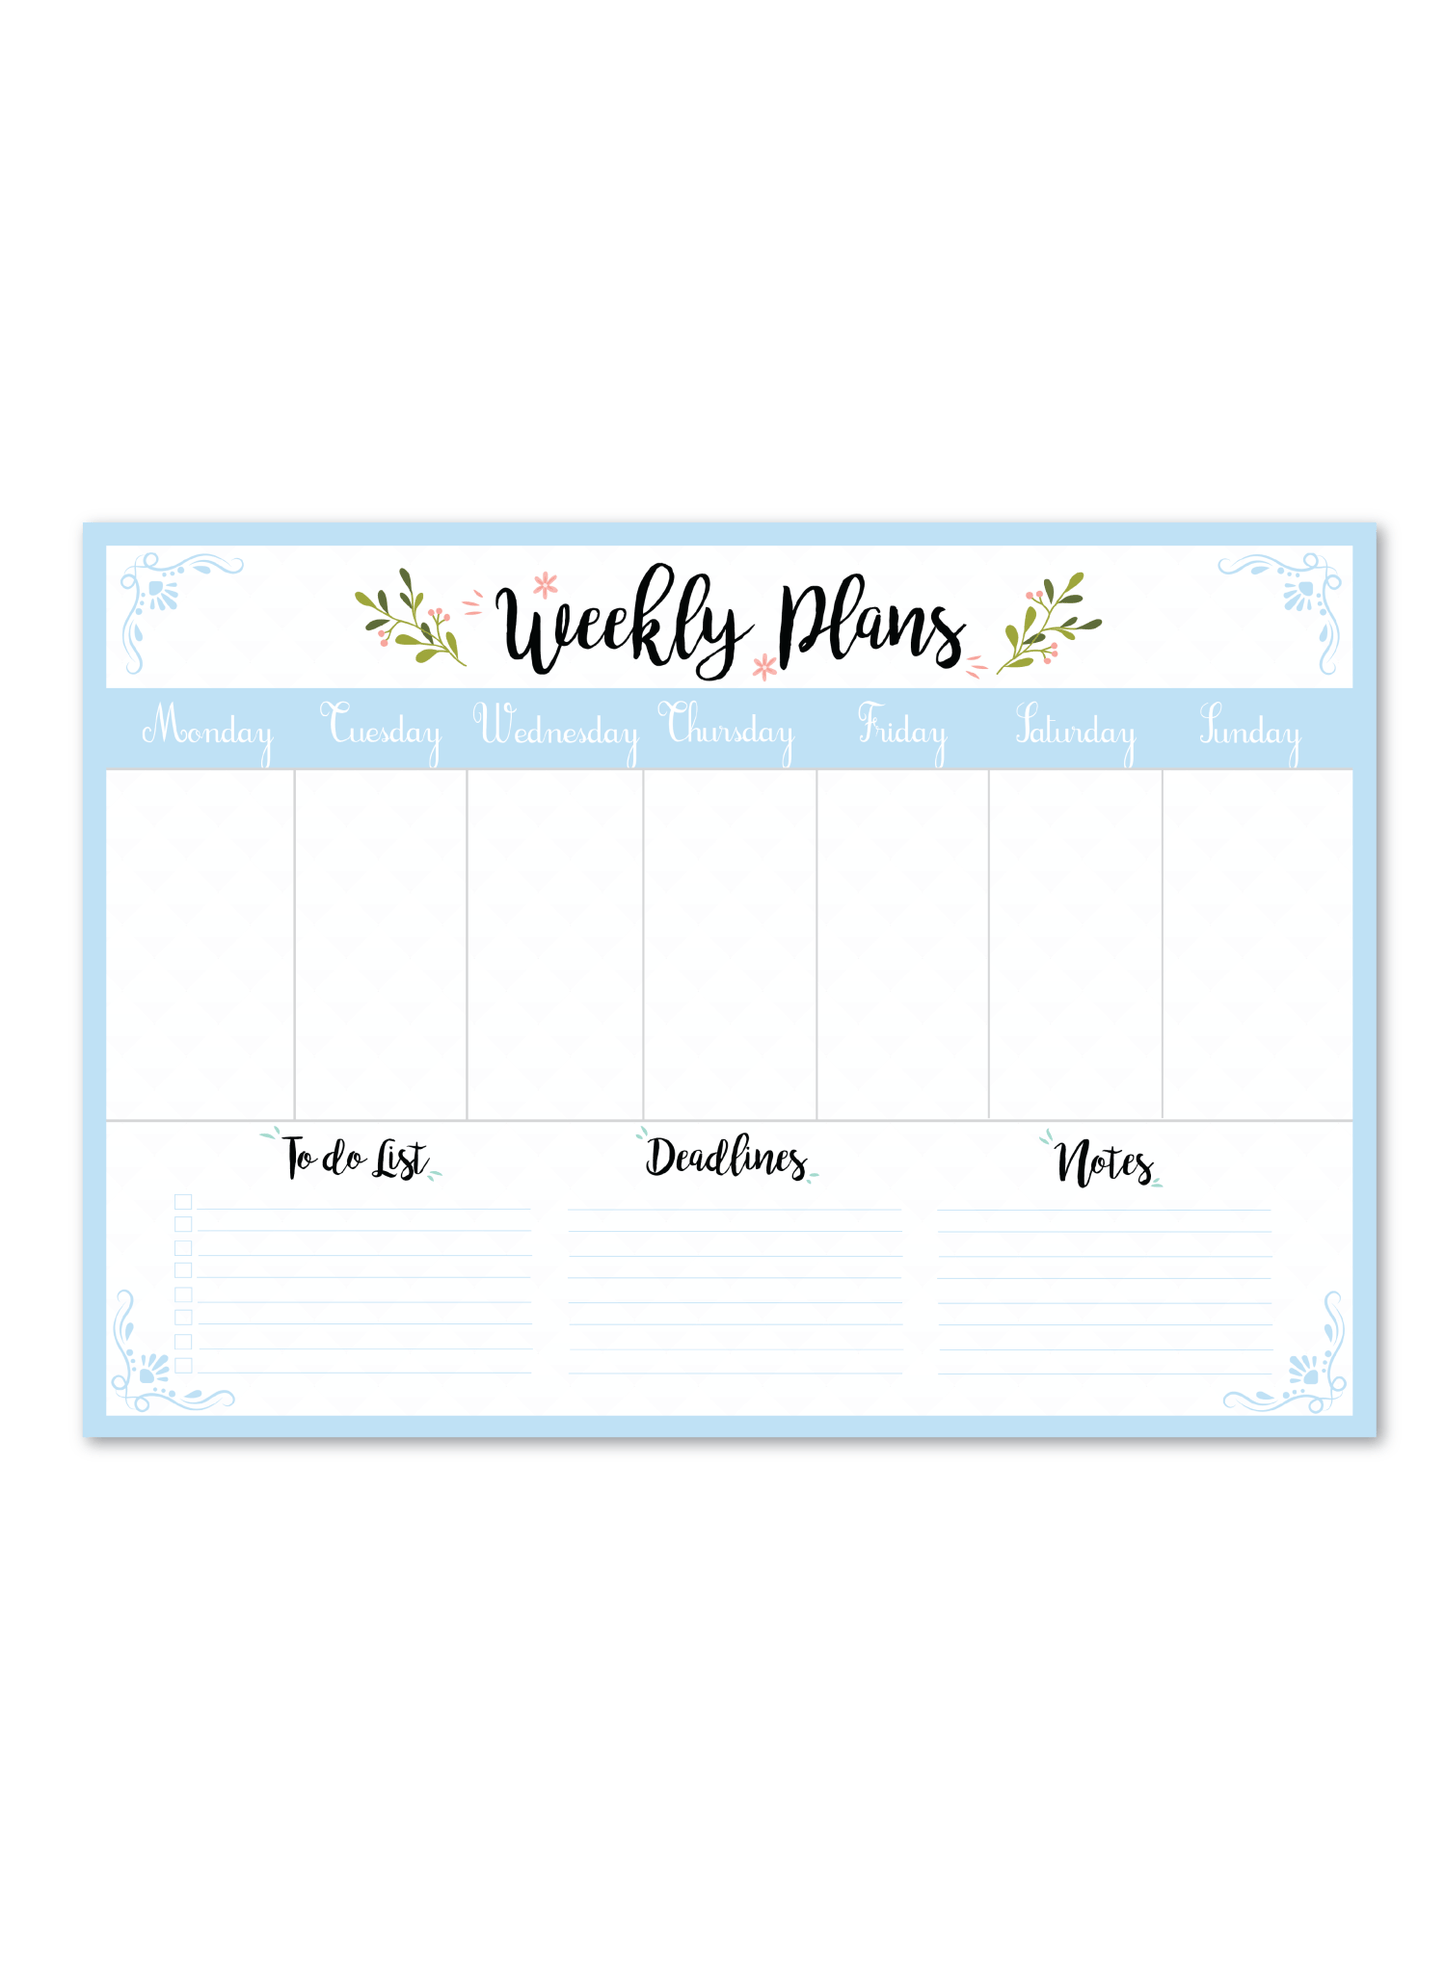 Your Weekly Planner | A4 Size - Supple Room